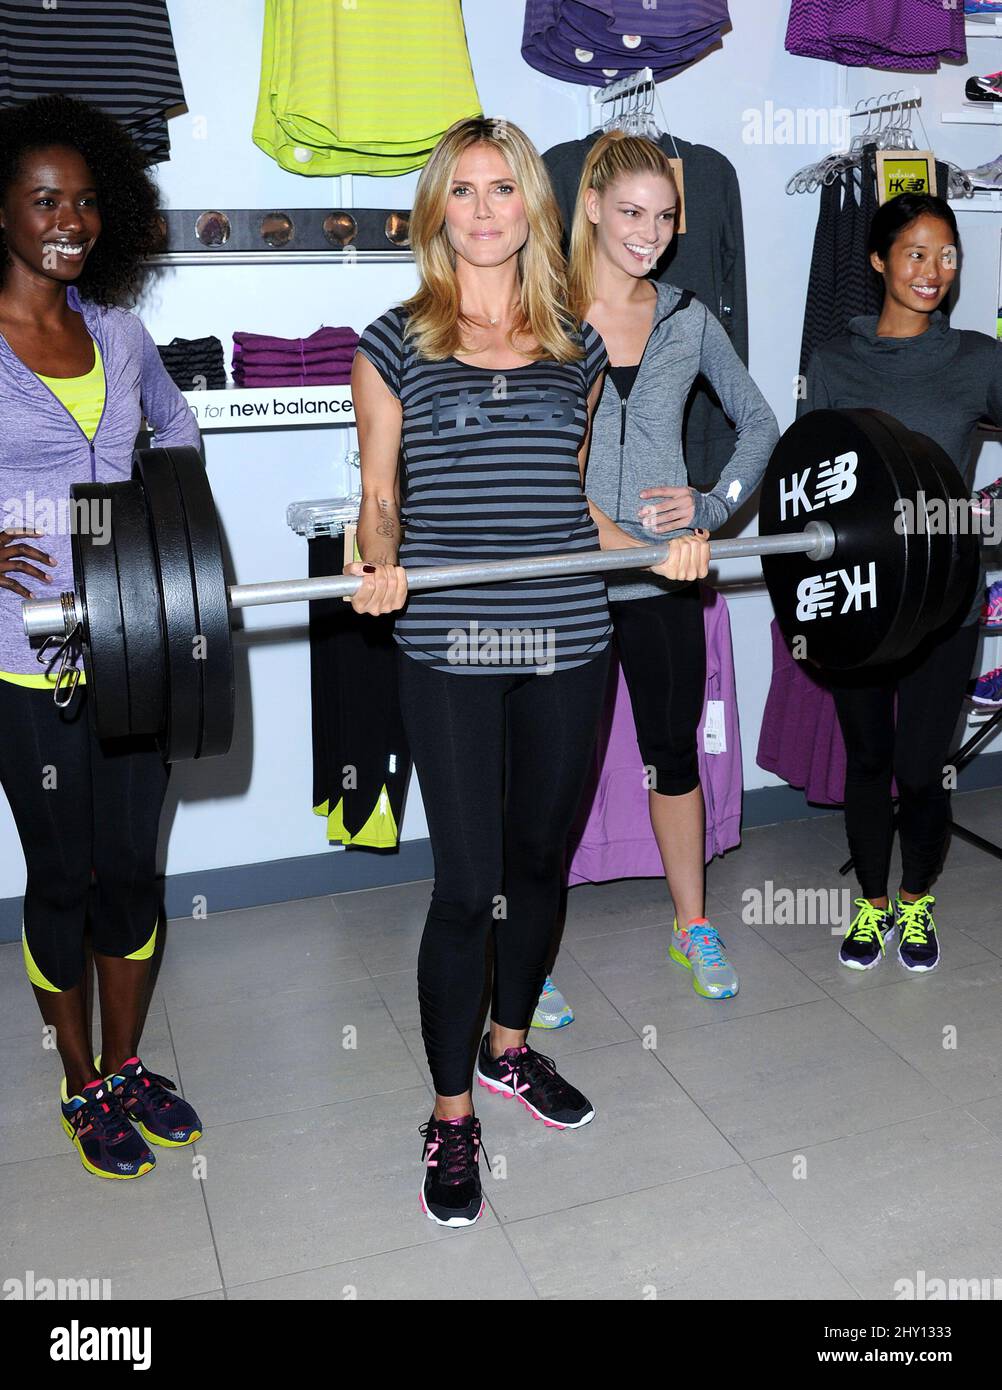 Heidi Klum attending a photocall for the launch of her New Balance  collection in Culver City, California Stock Photo - Alamy